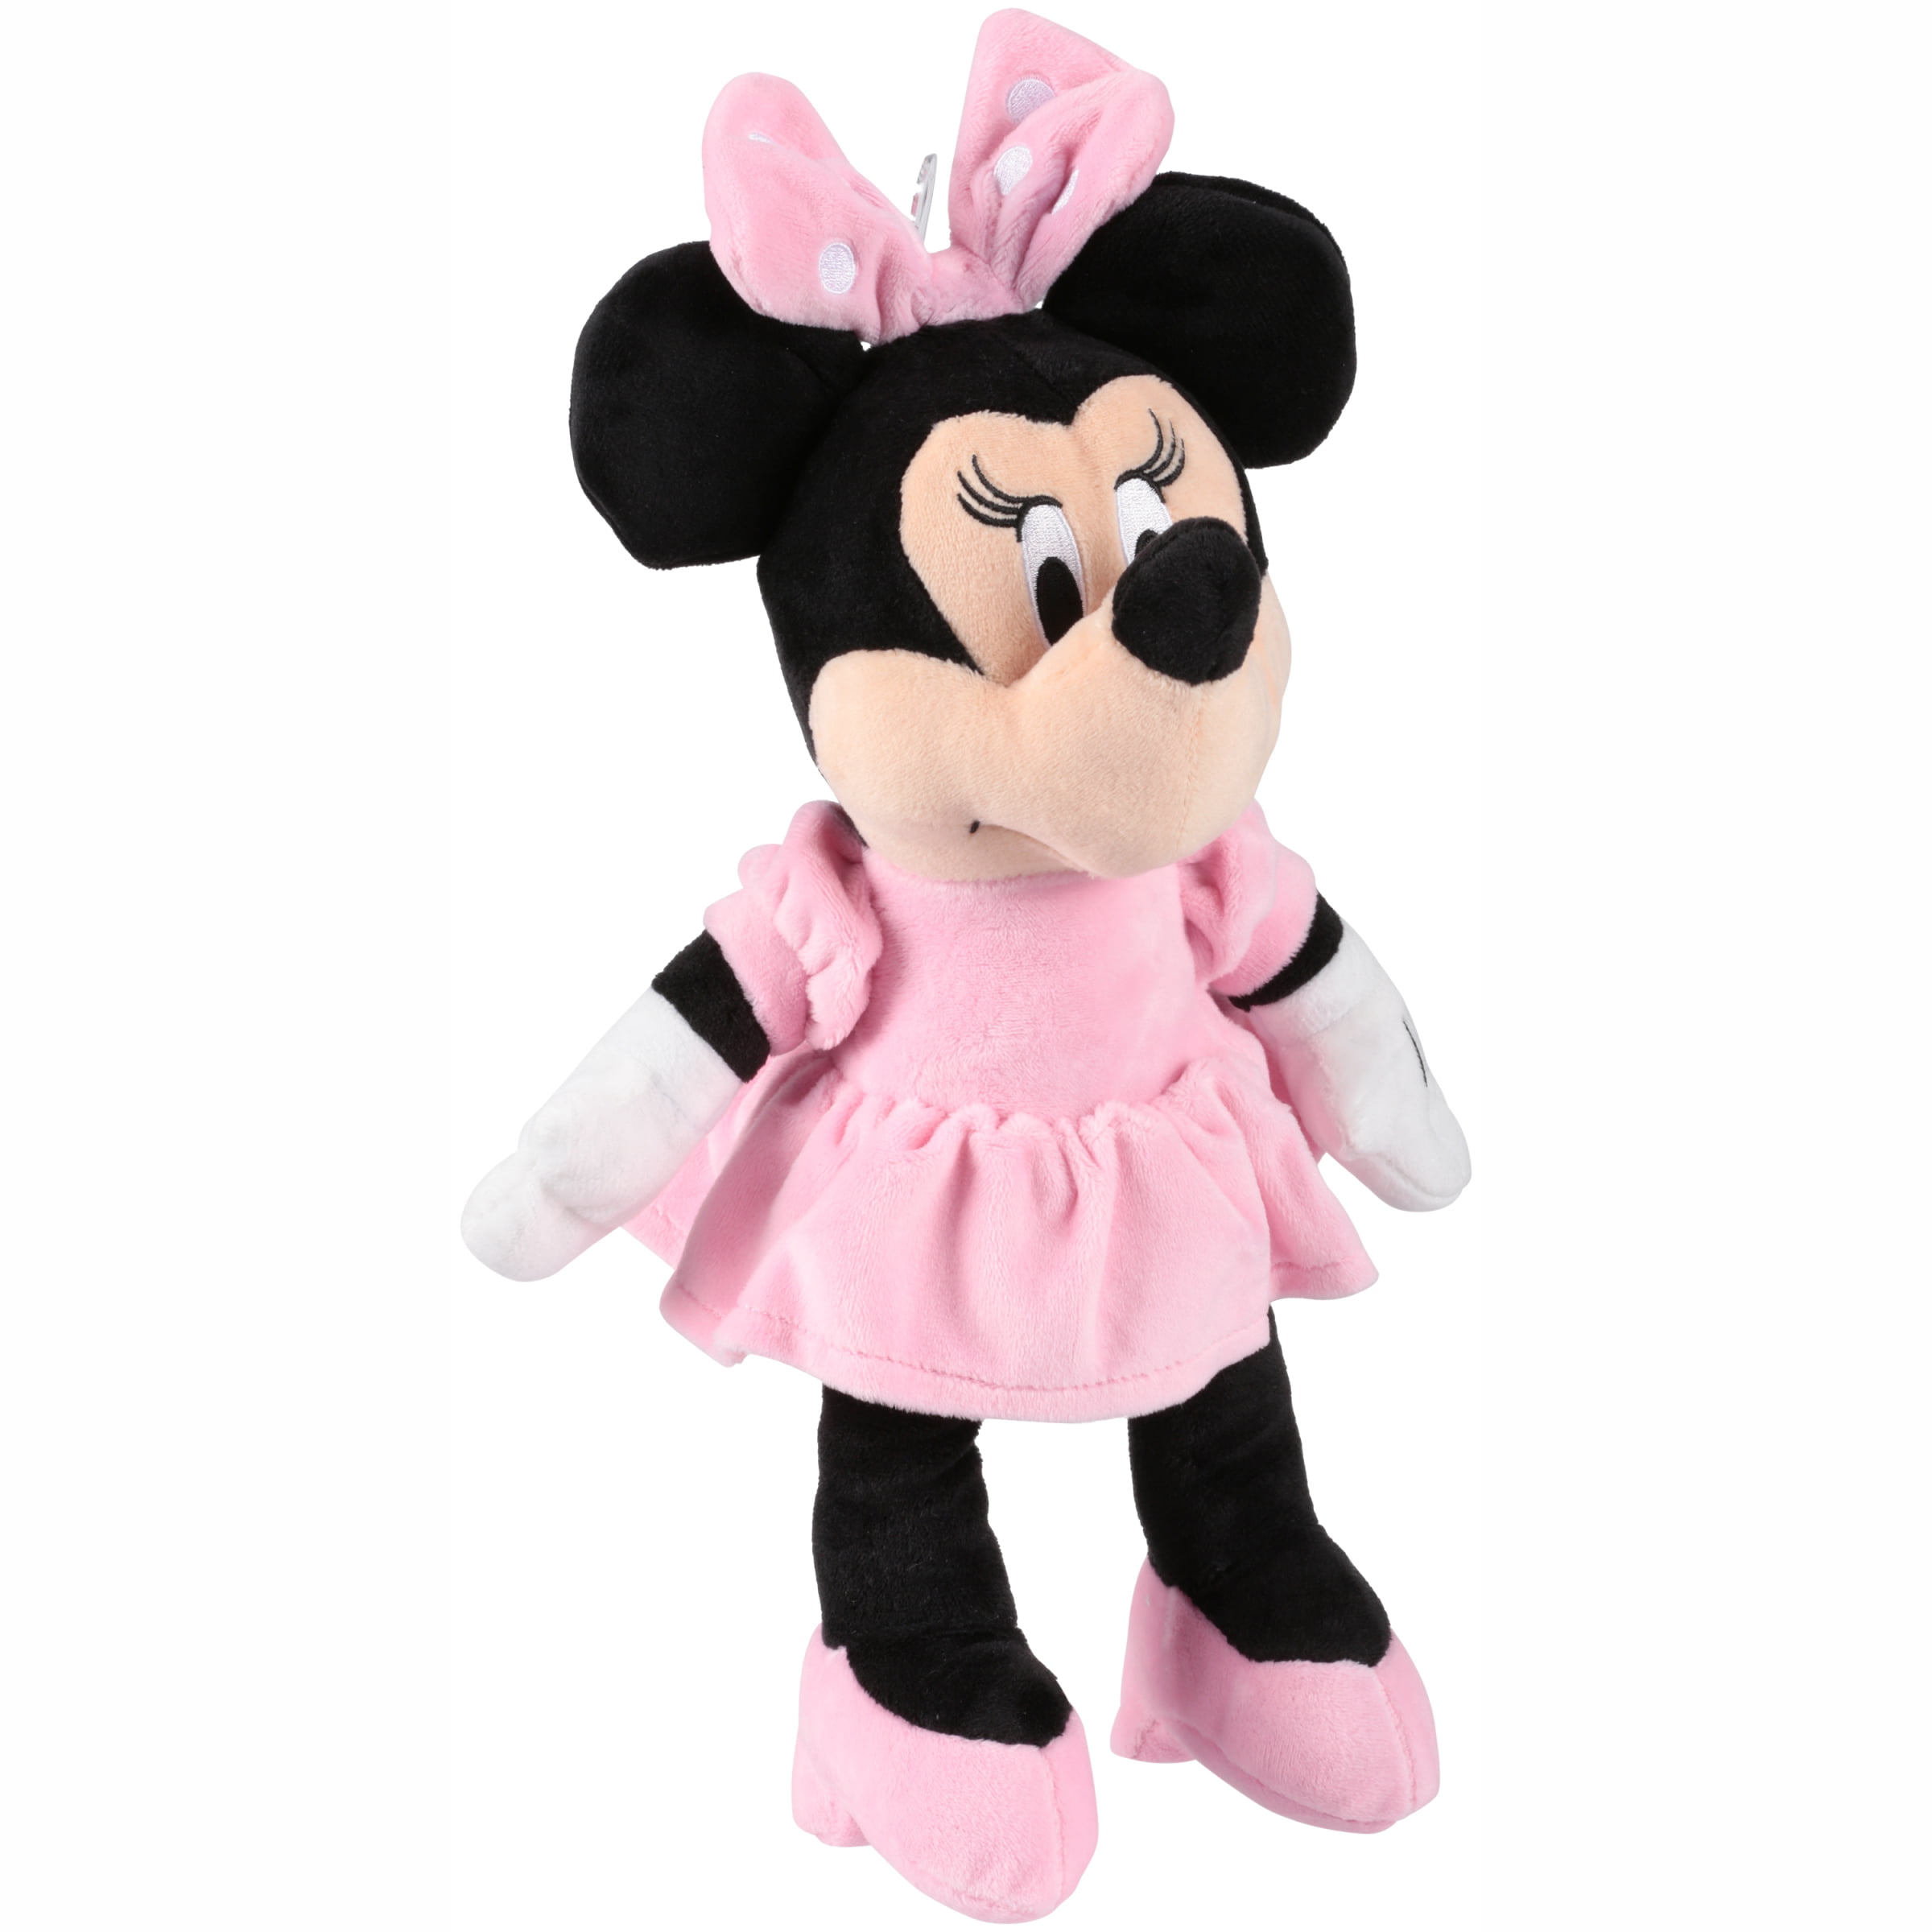 NEW Disney Baby Mickey & Minnie Mouse Blue Pink Pastel Plush Set of 2 Super Soft 